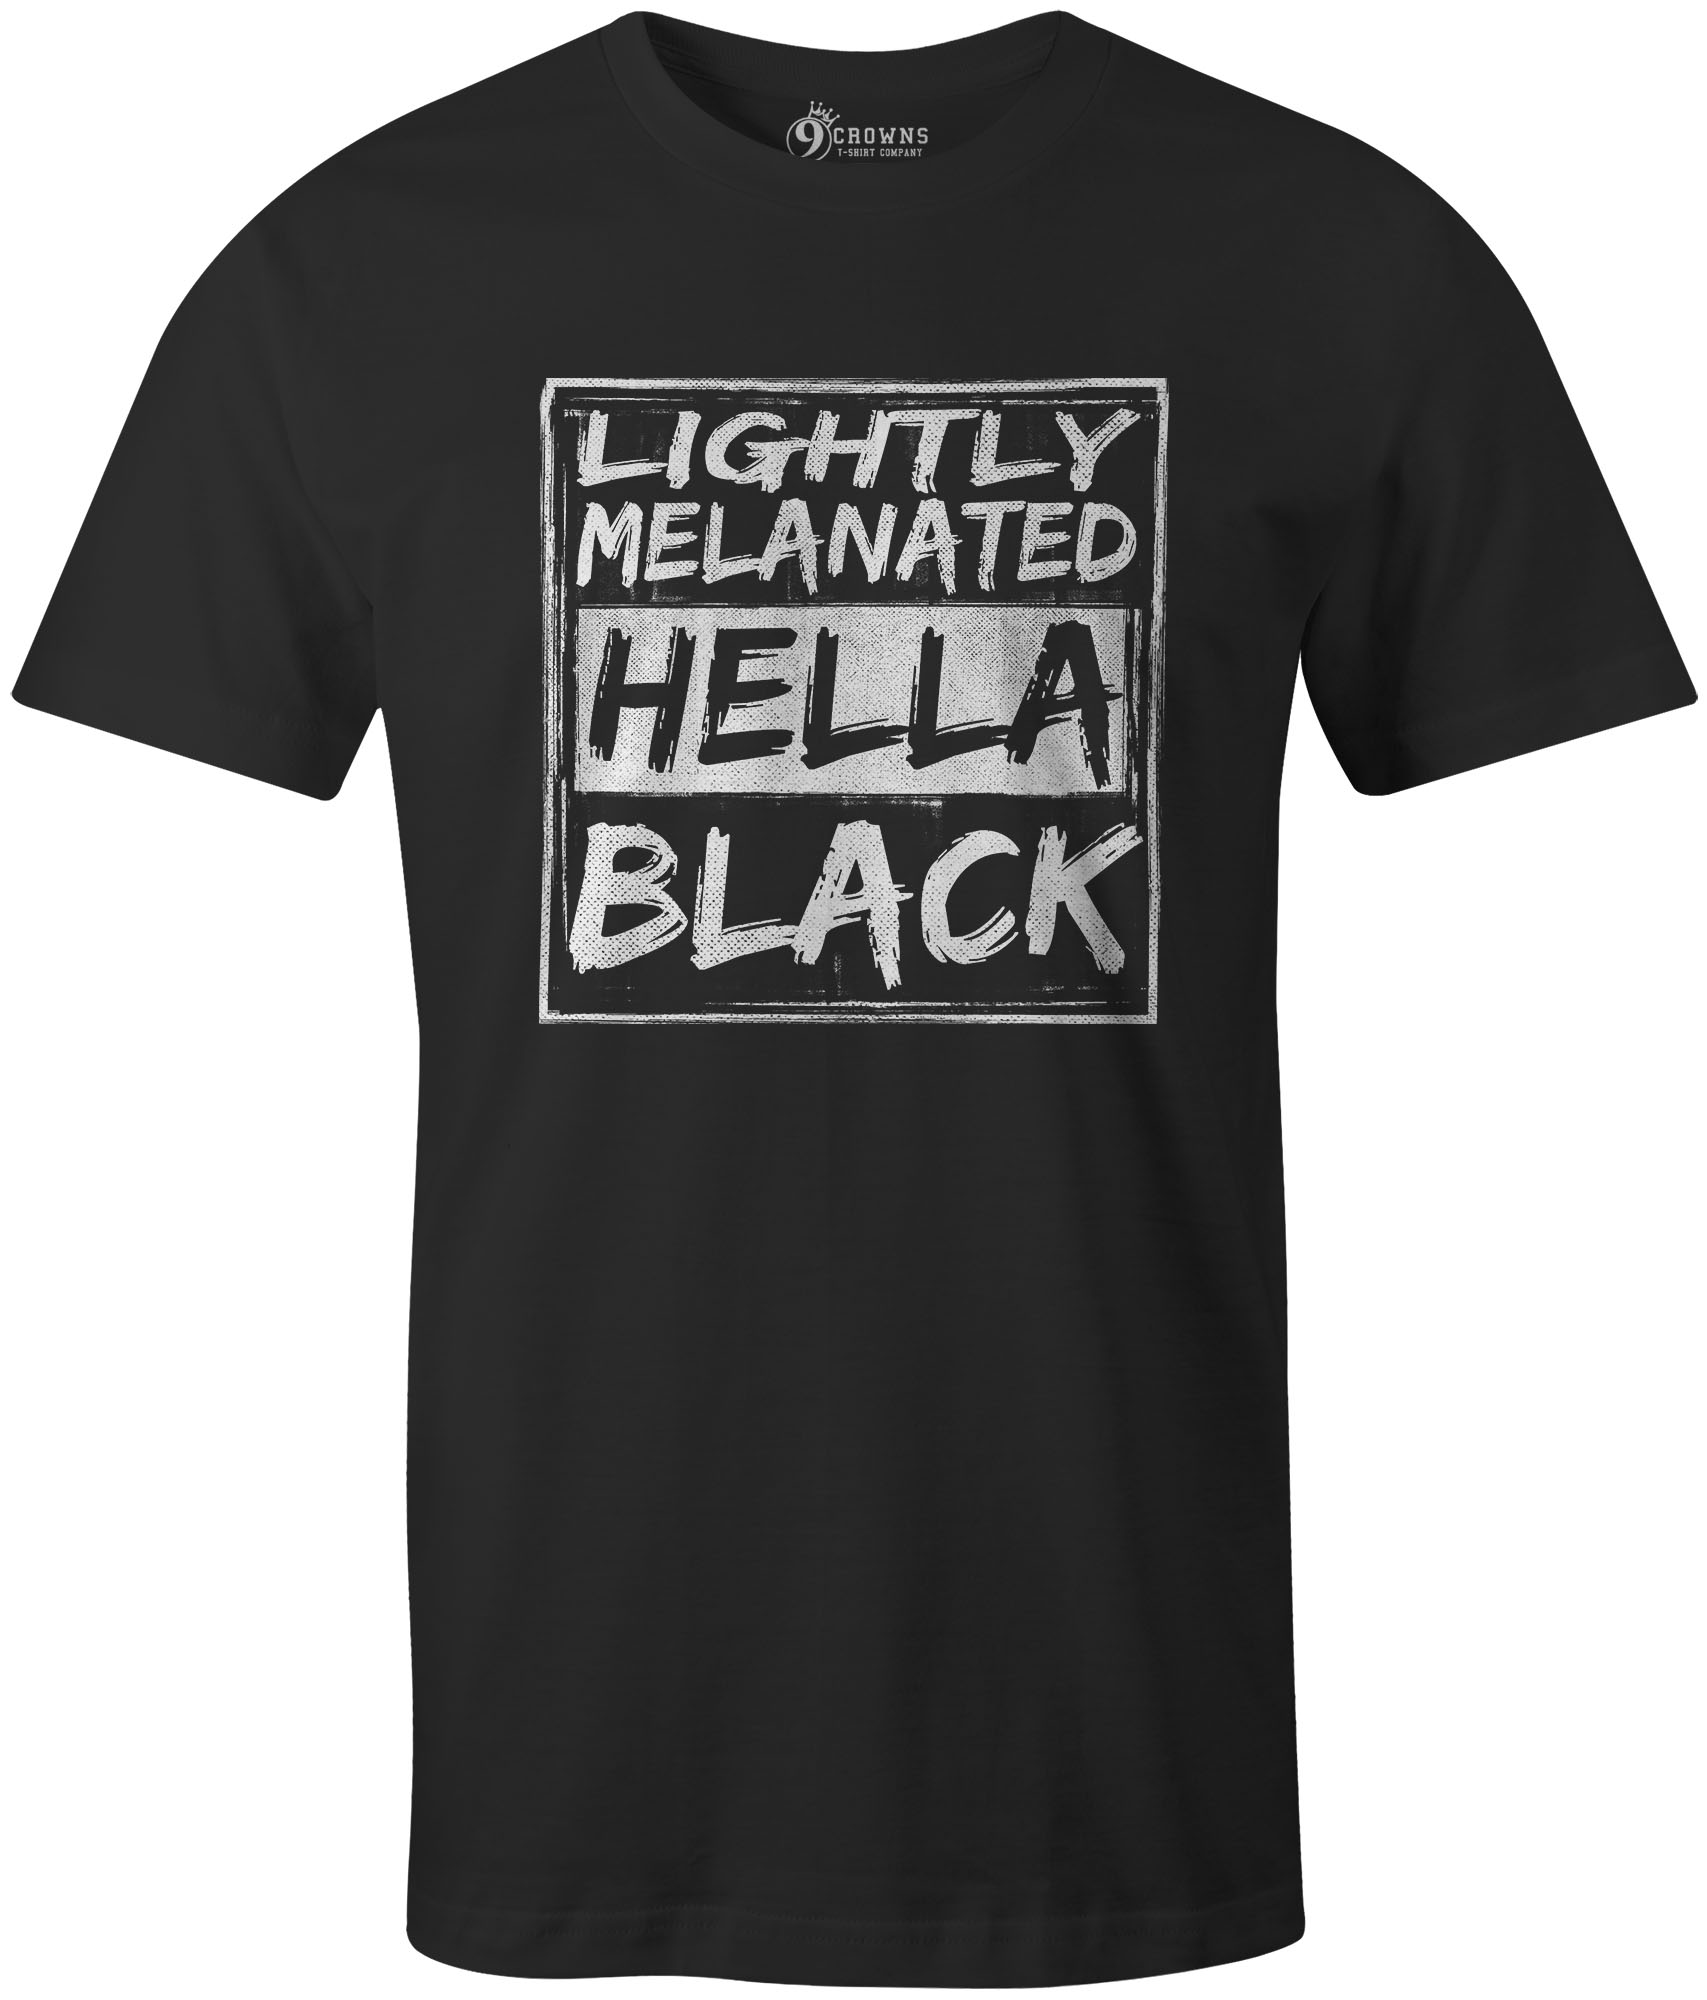 9 Crowns Tees Lightly Melanated Hella Black Funny Graphic T-Shirt (Juniors  Charcoal, X-Large)